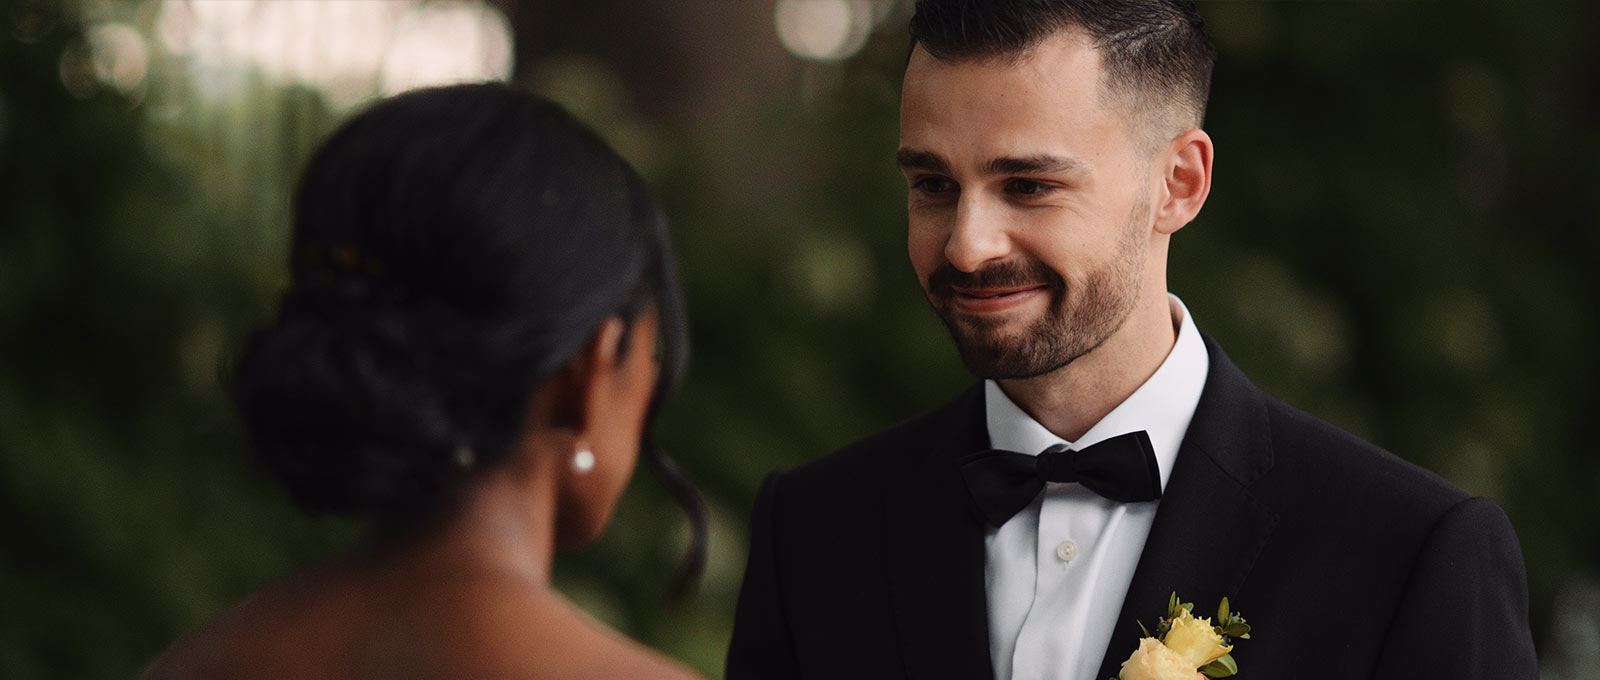 Groom shares personal vows with his bride.